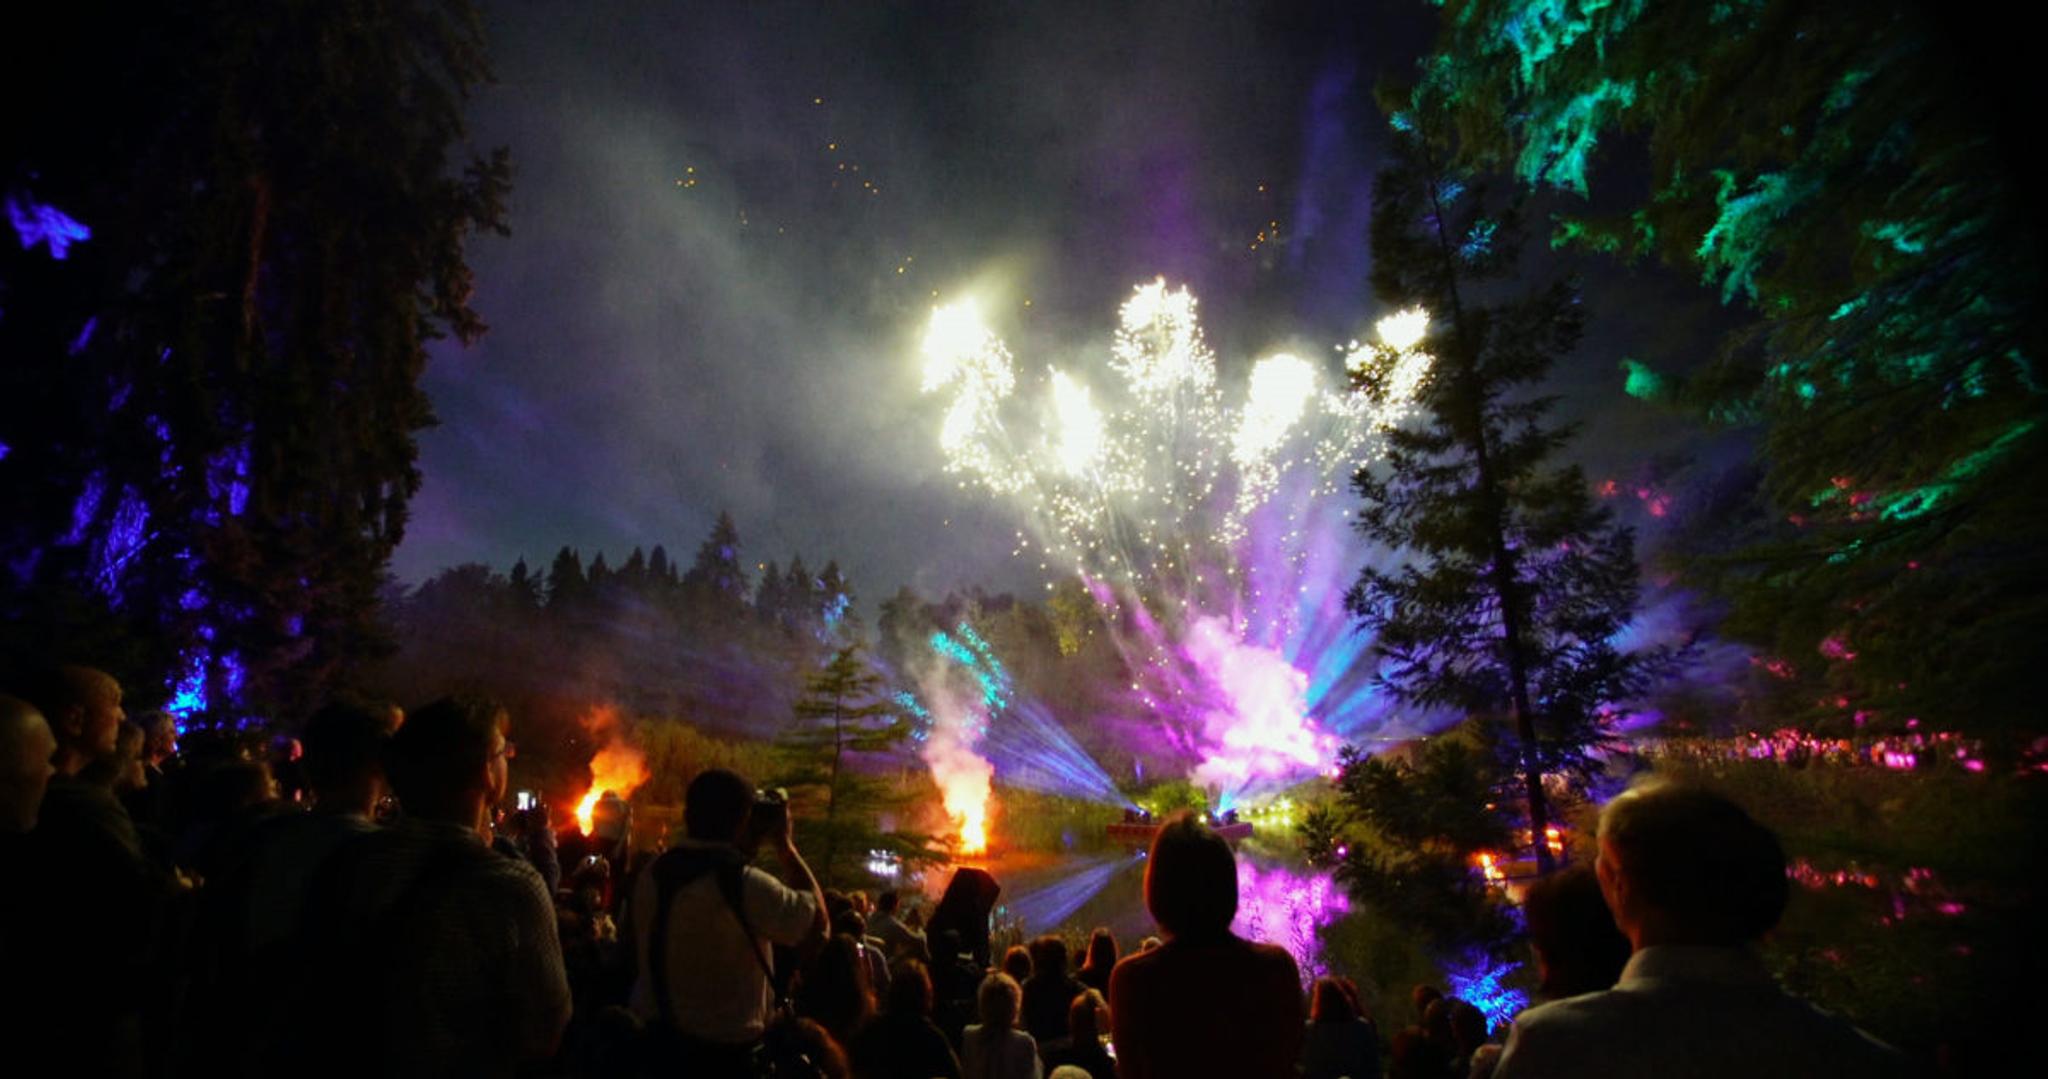 A crowd watches an explosion of light and fireworks in a forest at night.